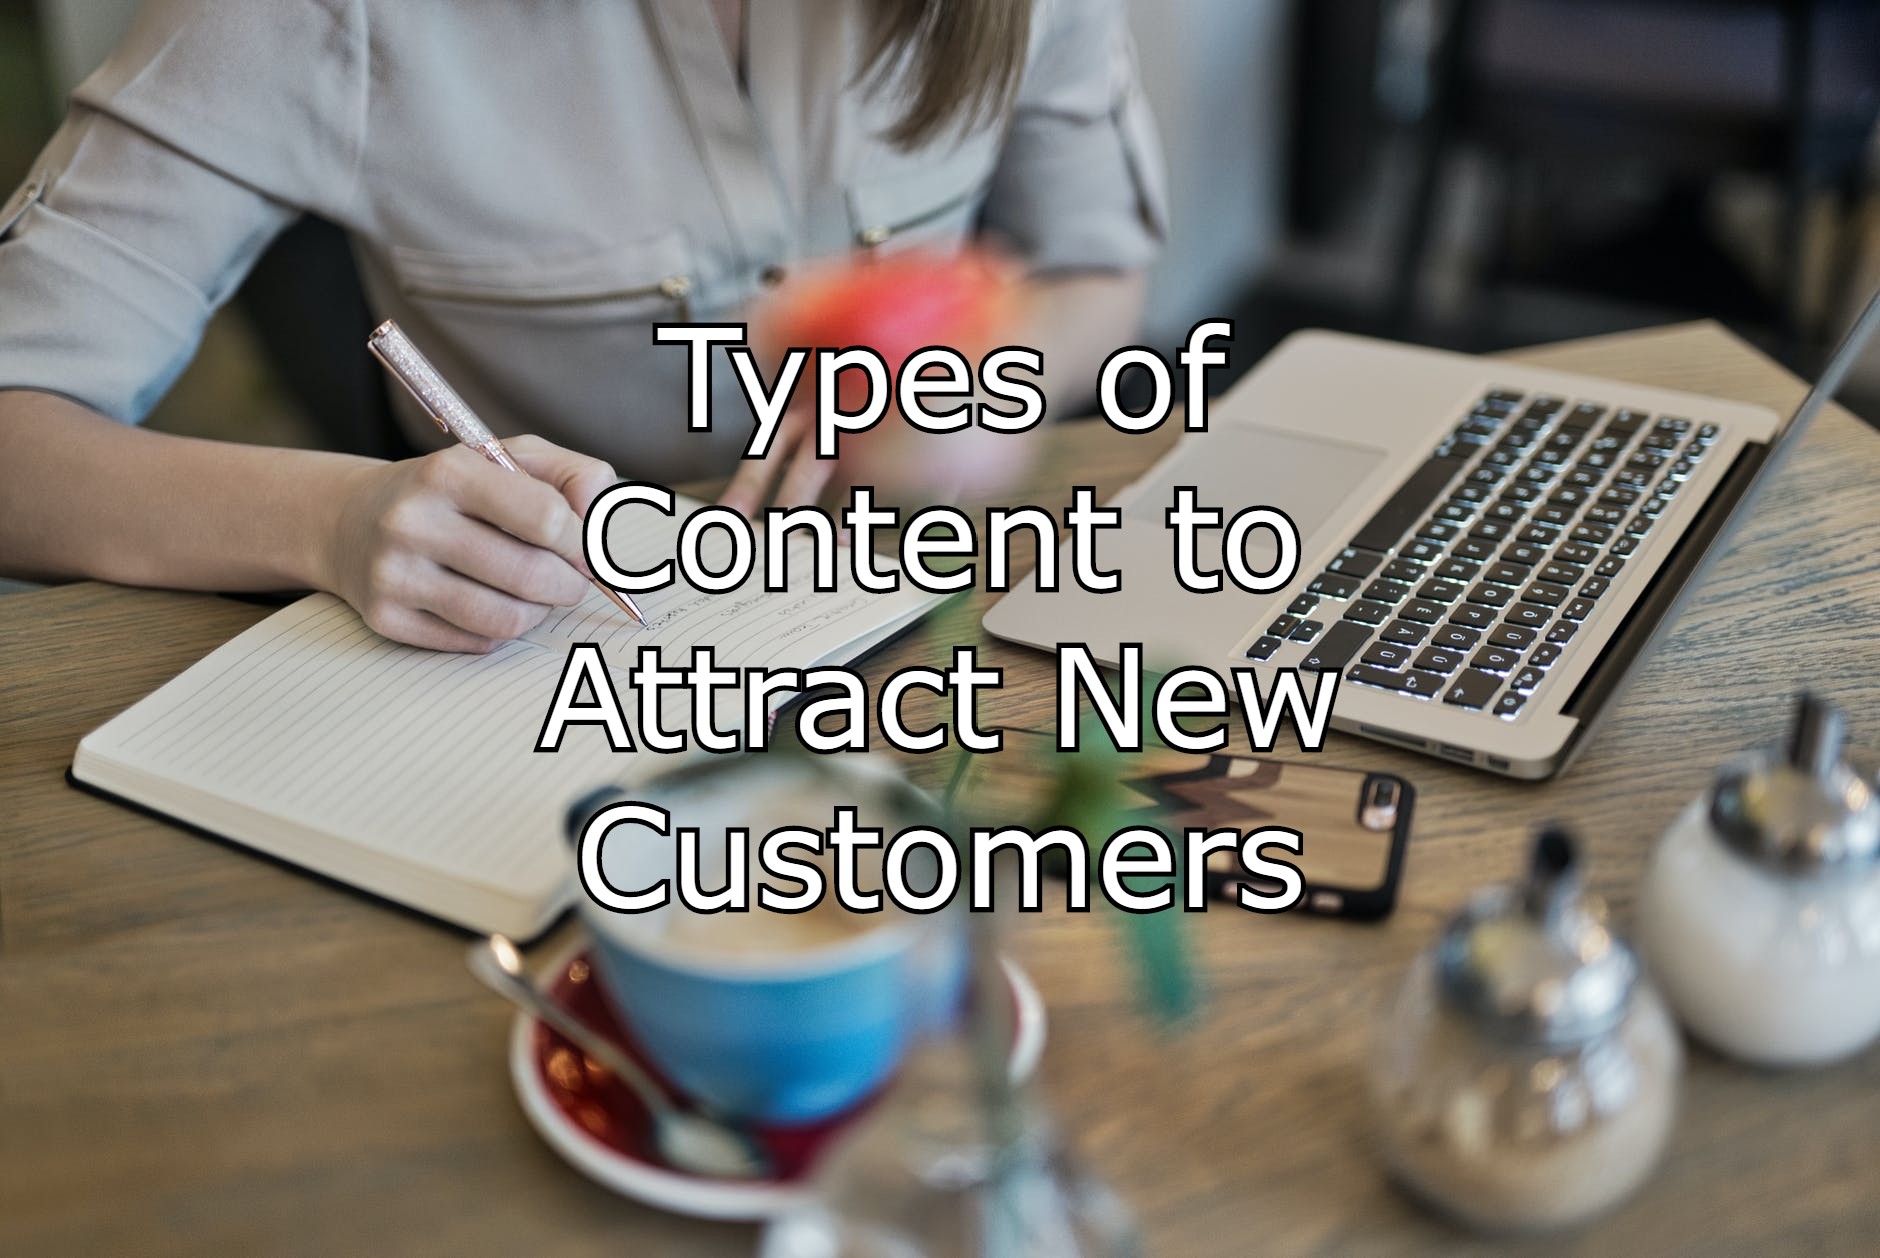 Types of Content to Attract New Customers